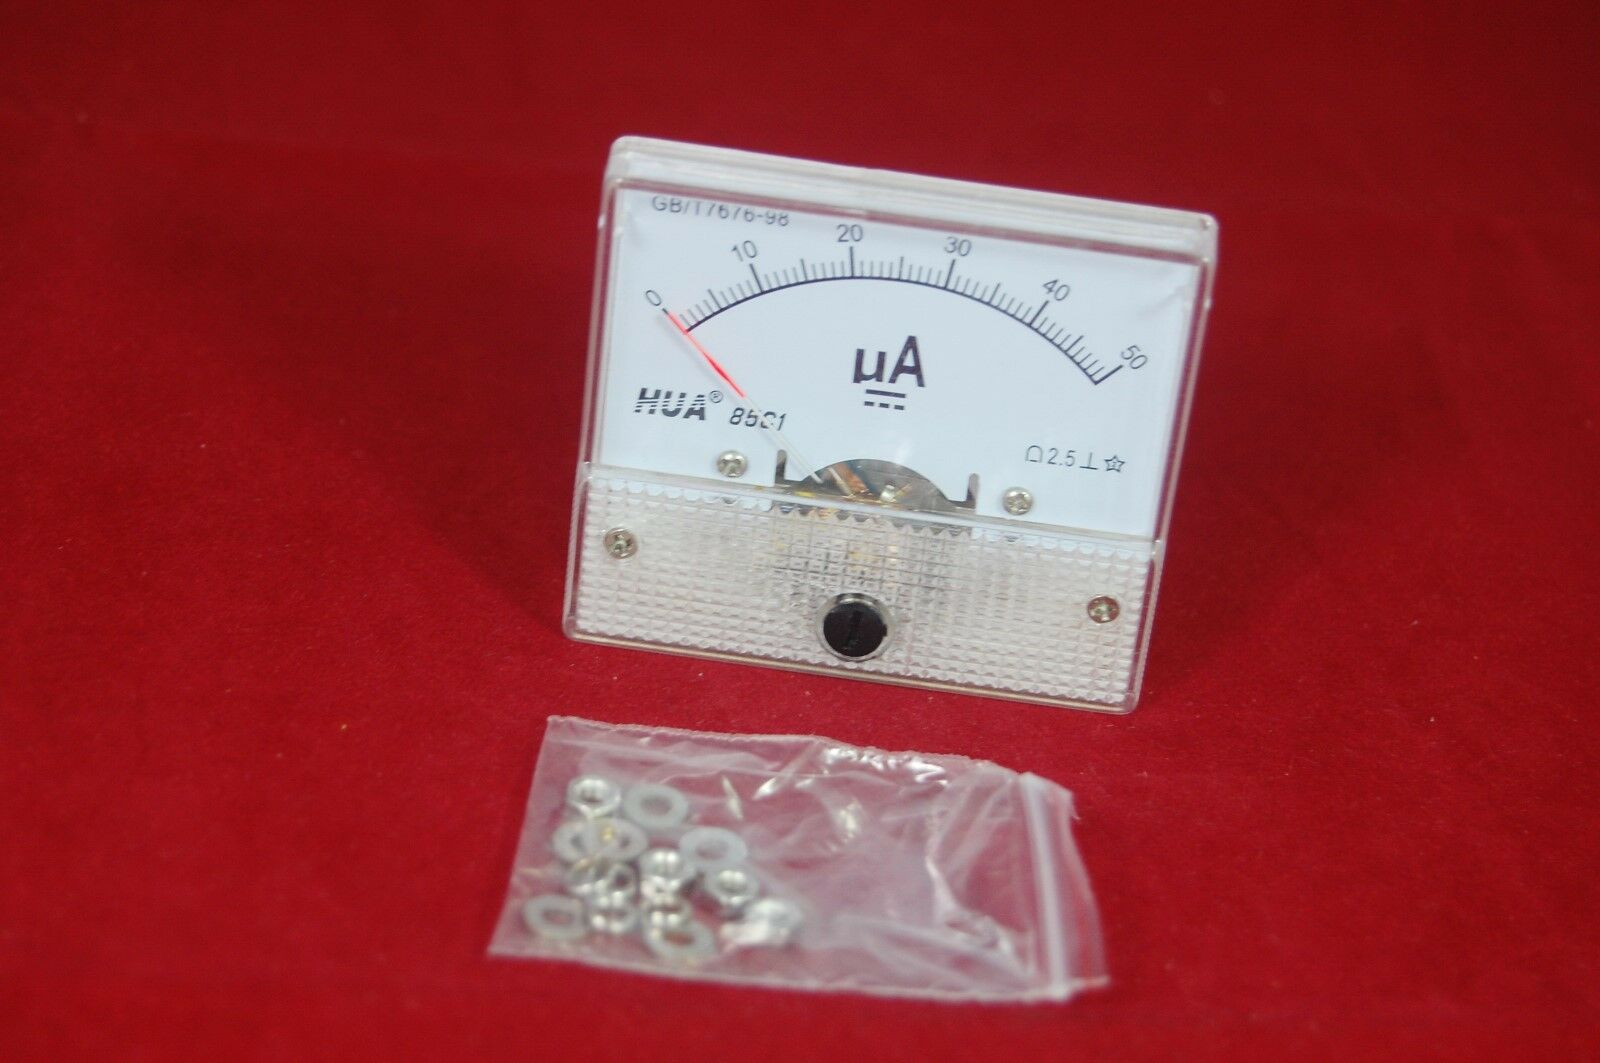 DC 50uA Analog Ammeter Panel AMP Current Meter 85C1 0-50uA DC directly Connect